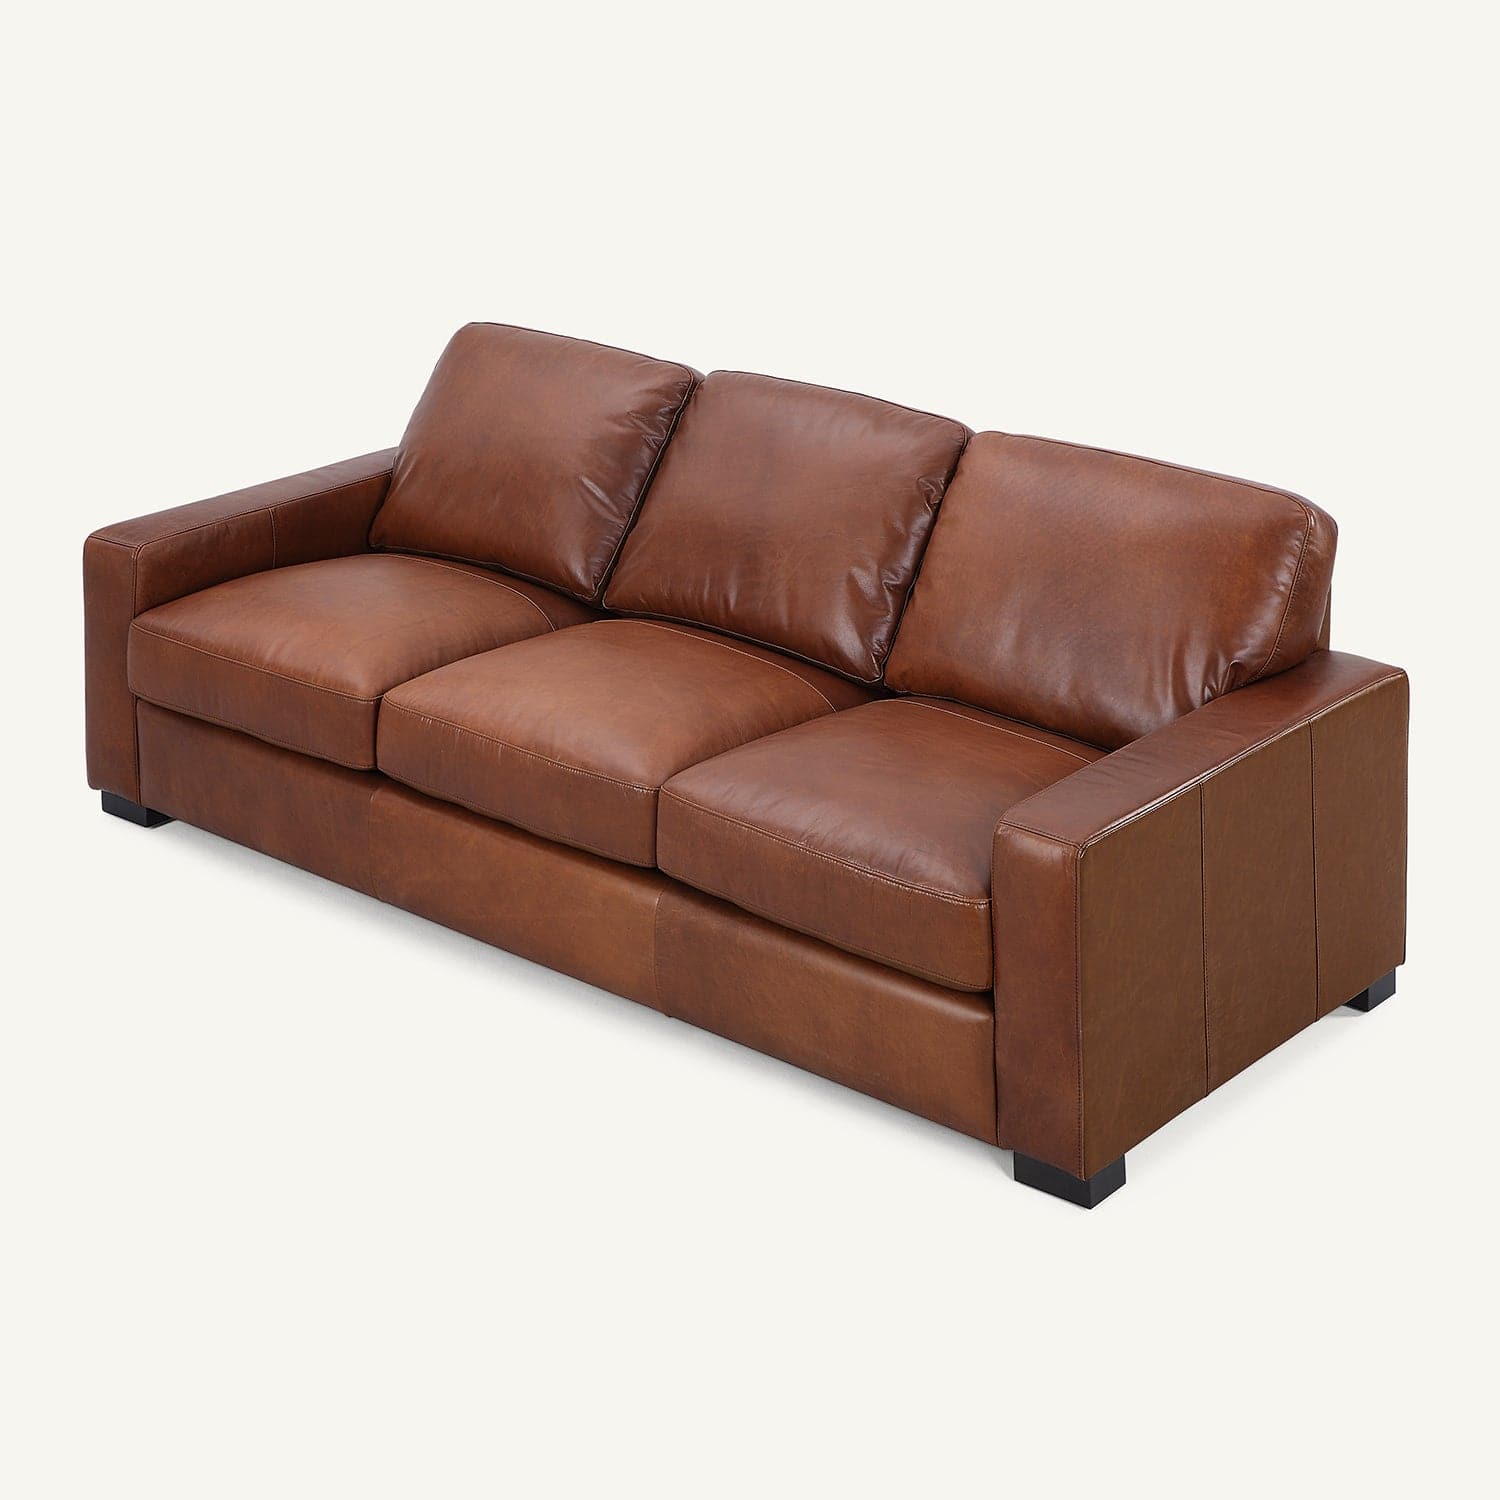 Randall Chestnut Brown Oil Wax Leather 3-Seater Sofa with Ottoman